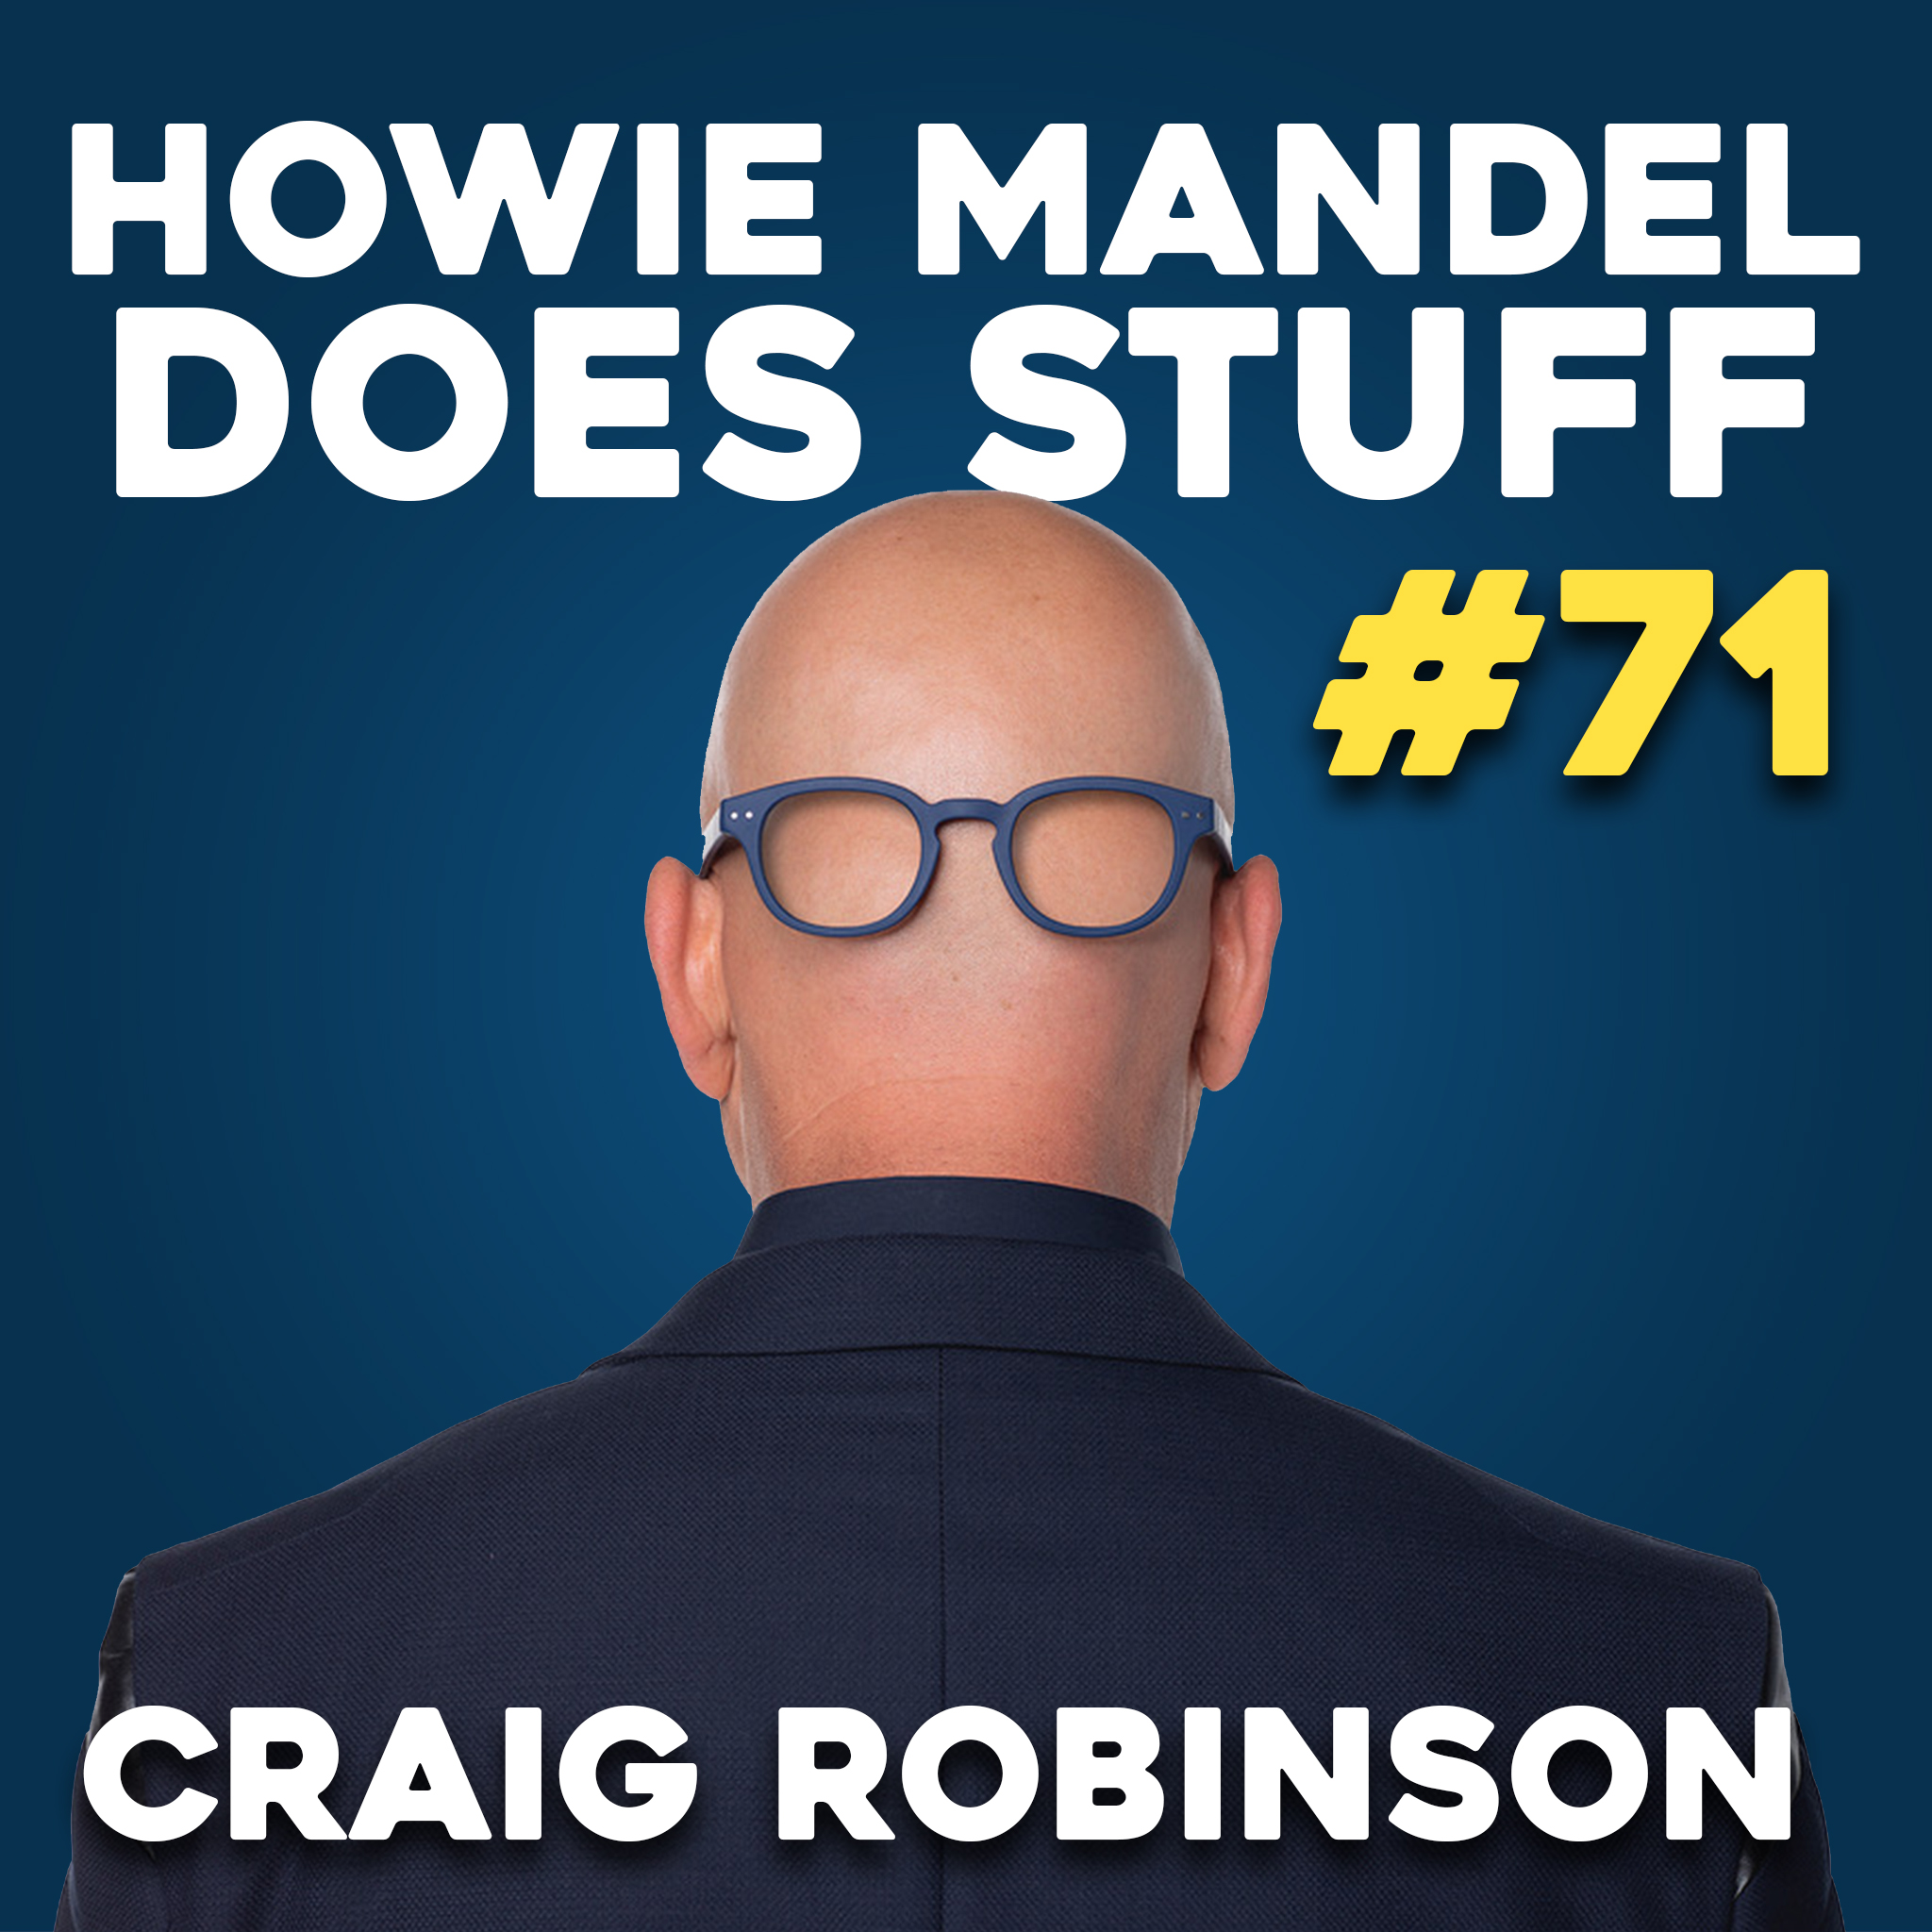 Why Craig Robinson and Howie Mandel are Banned from The James Corden Show | Howie Mandel Does Stuff #71